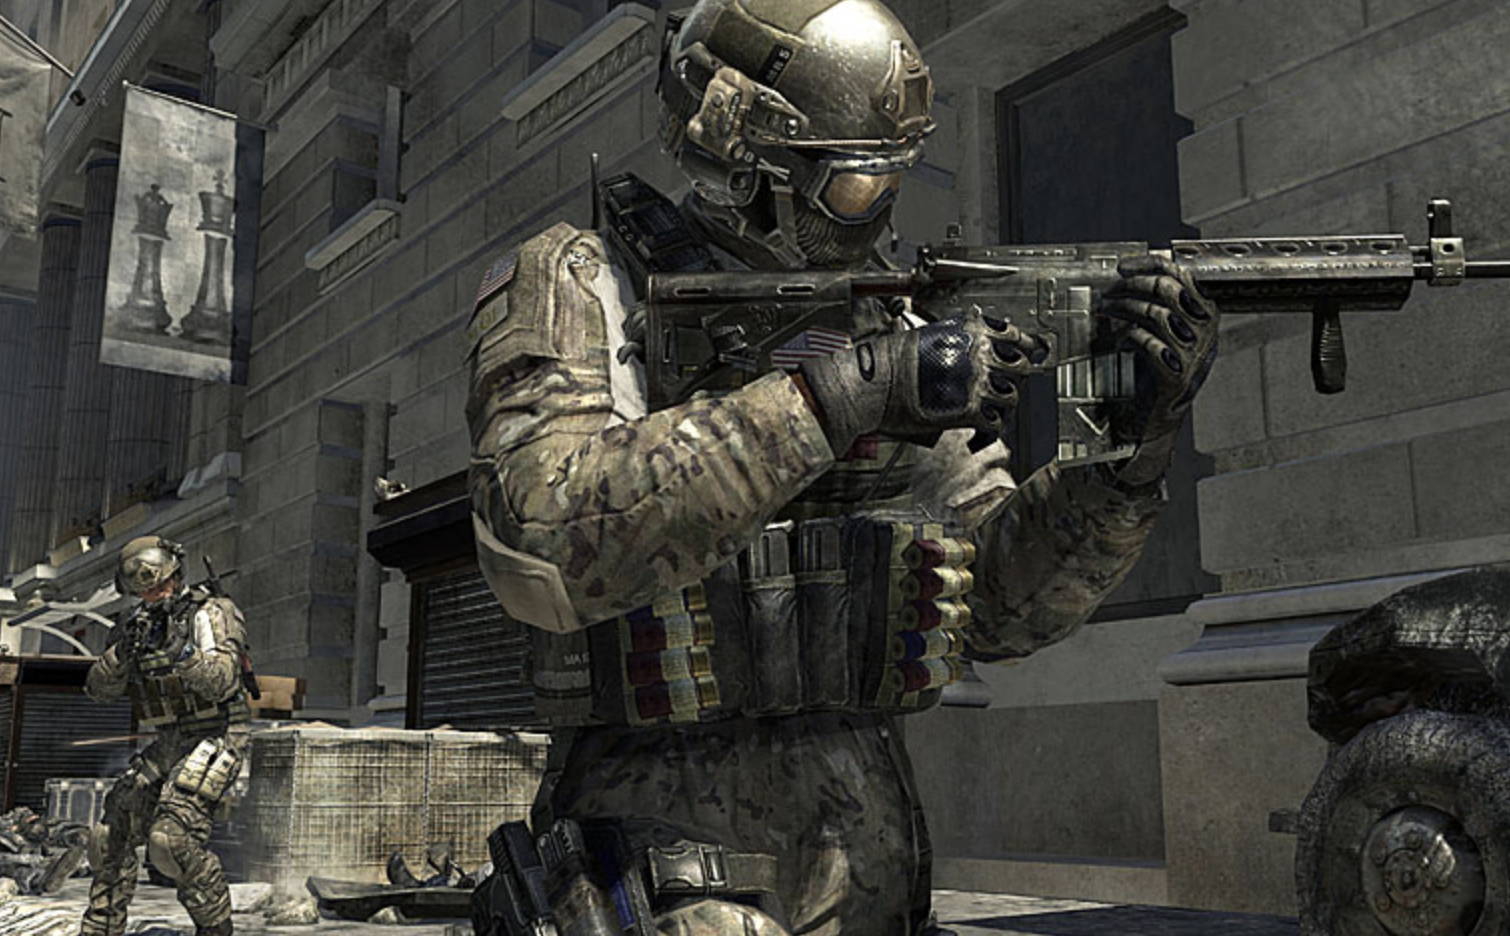 Modern Warfare 3 multiplayer launch is close, and people are